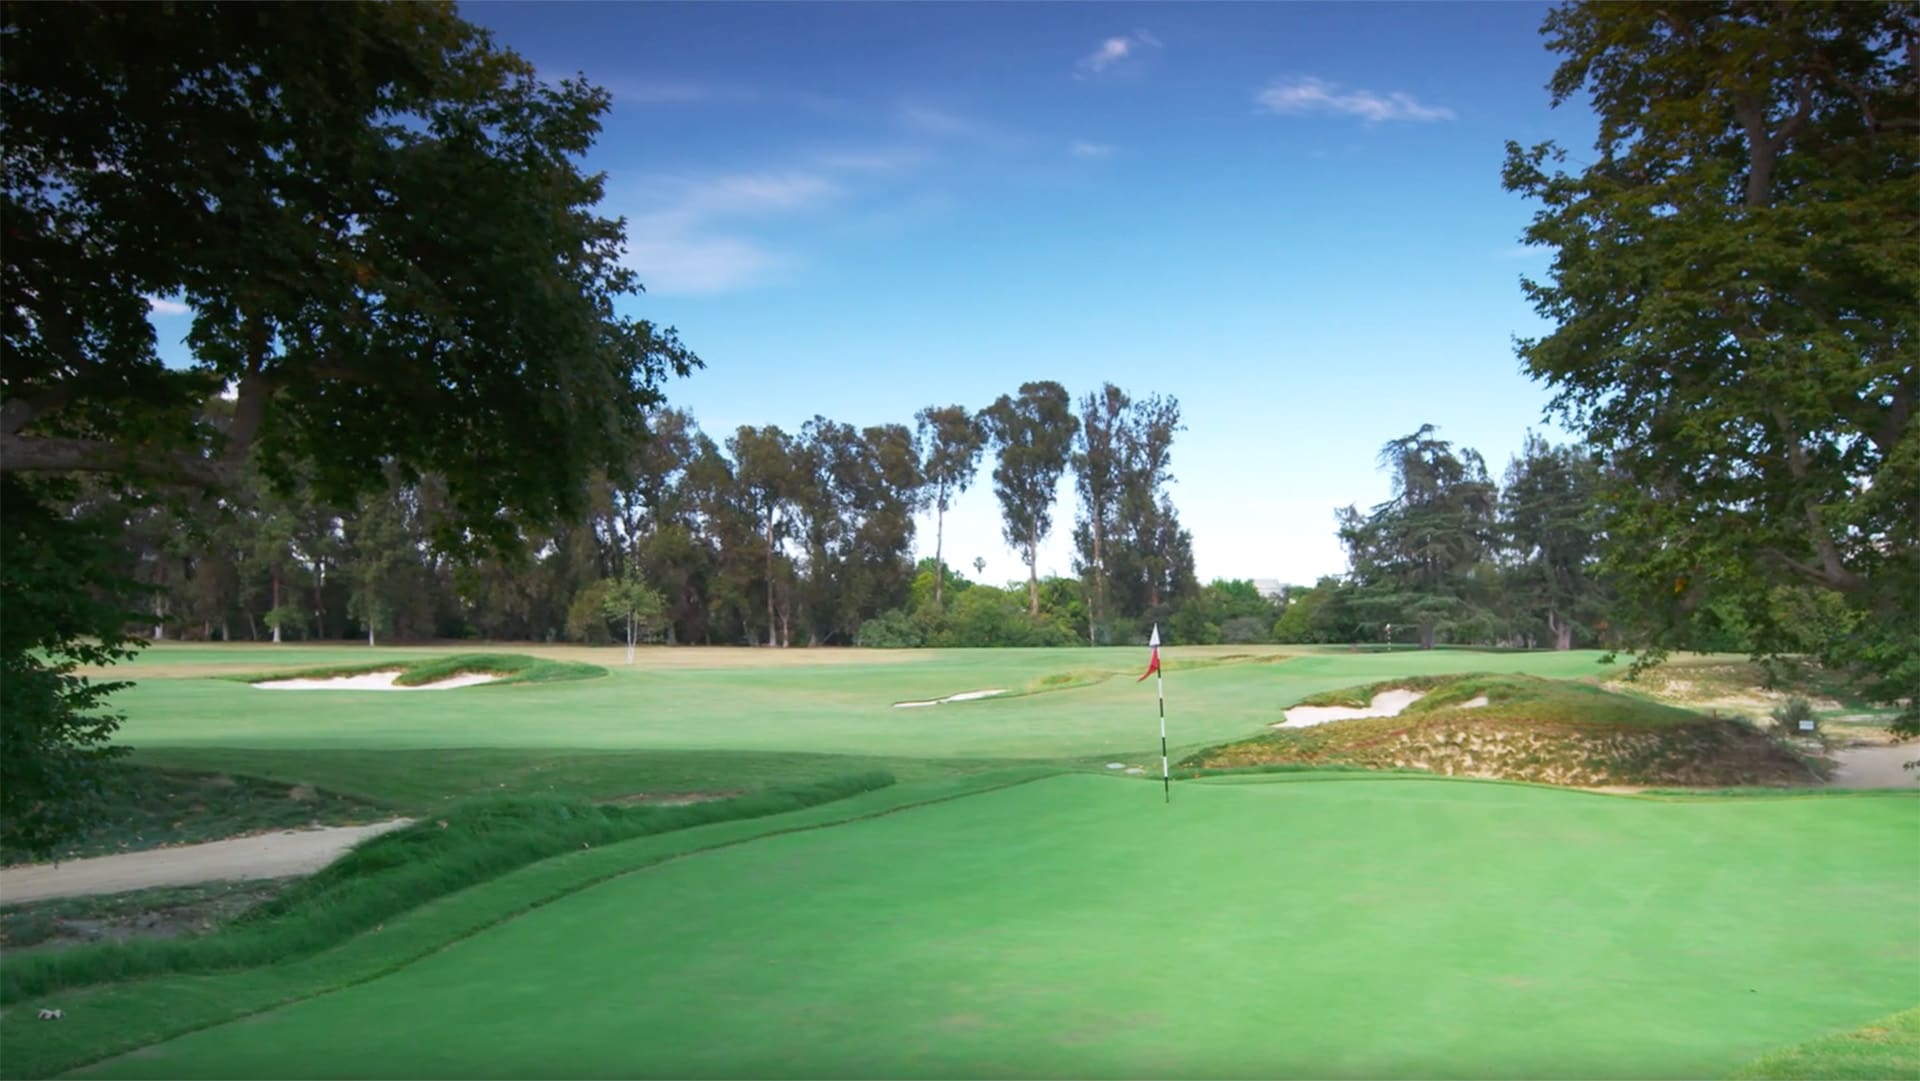 Los Angeles Country Club’s secret hole? The story behind ‘Little 17’